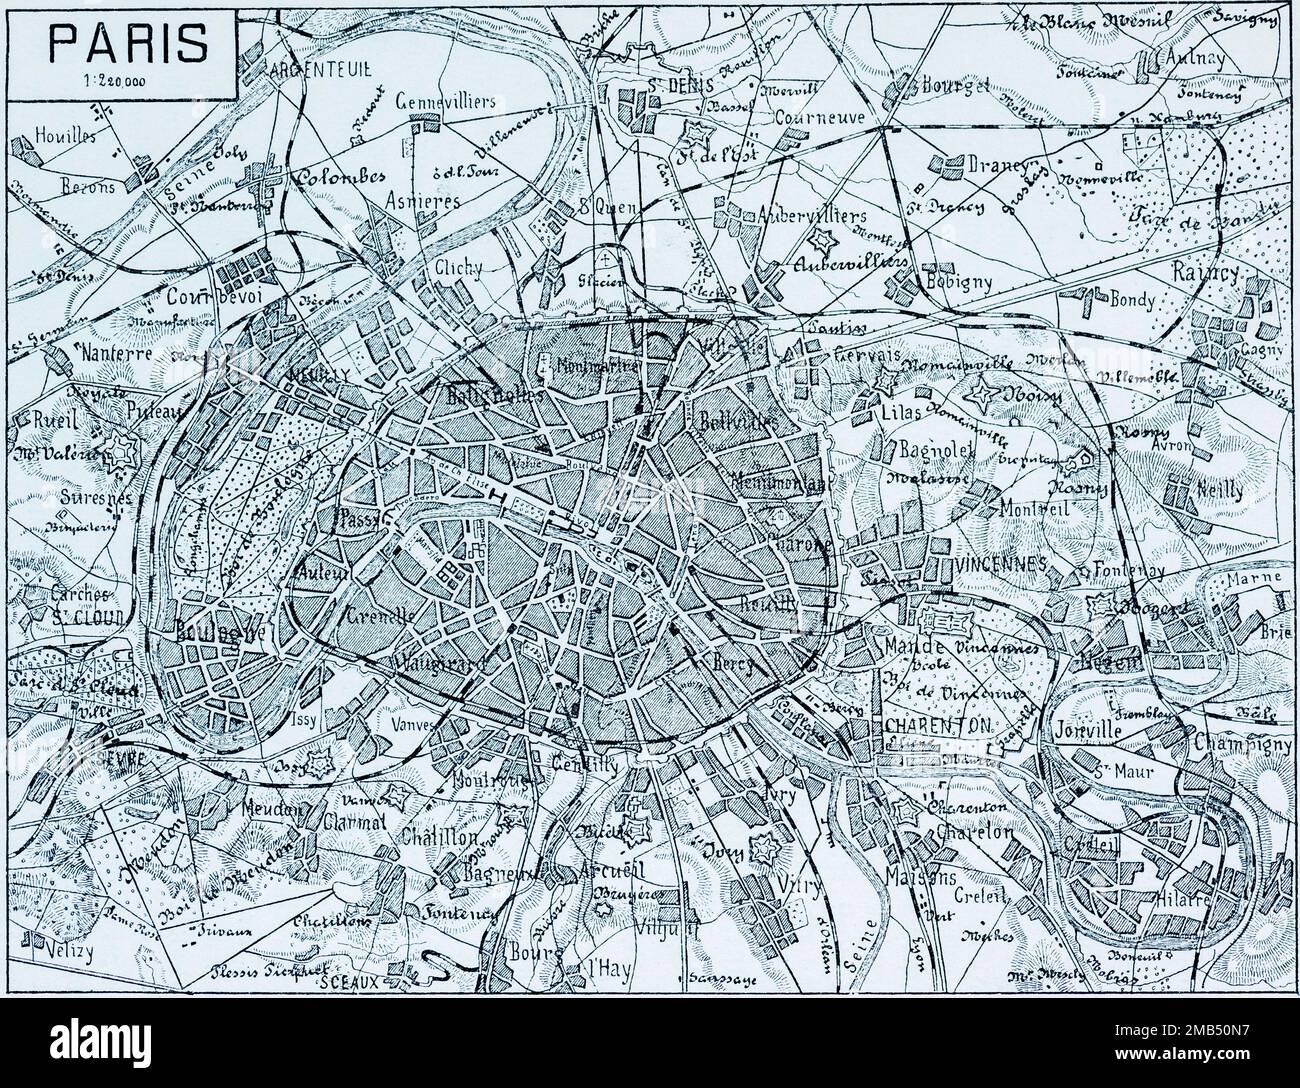 220, 000, districts, Montmartre, Seine, cartography, hatching, railway line, city of Paris, France, city map and surroundings Stock Photo